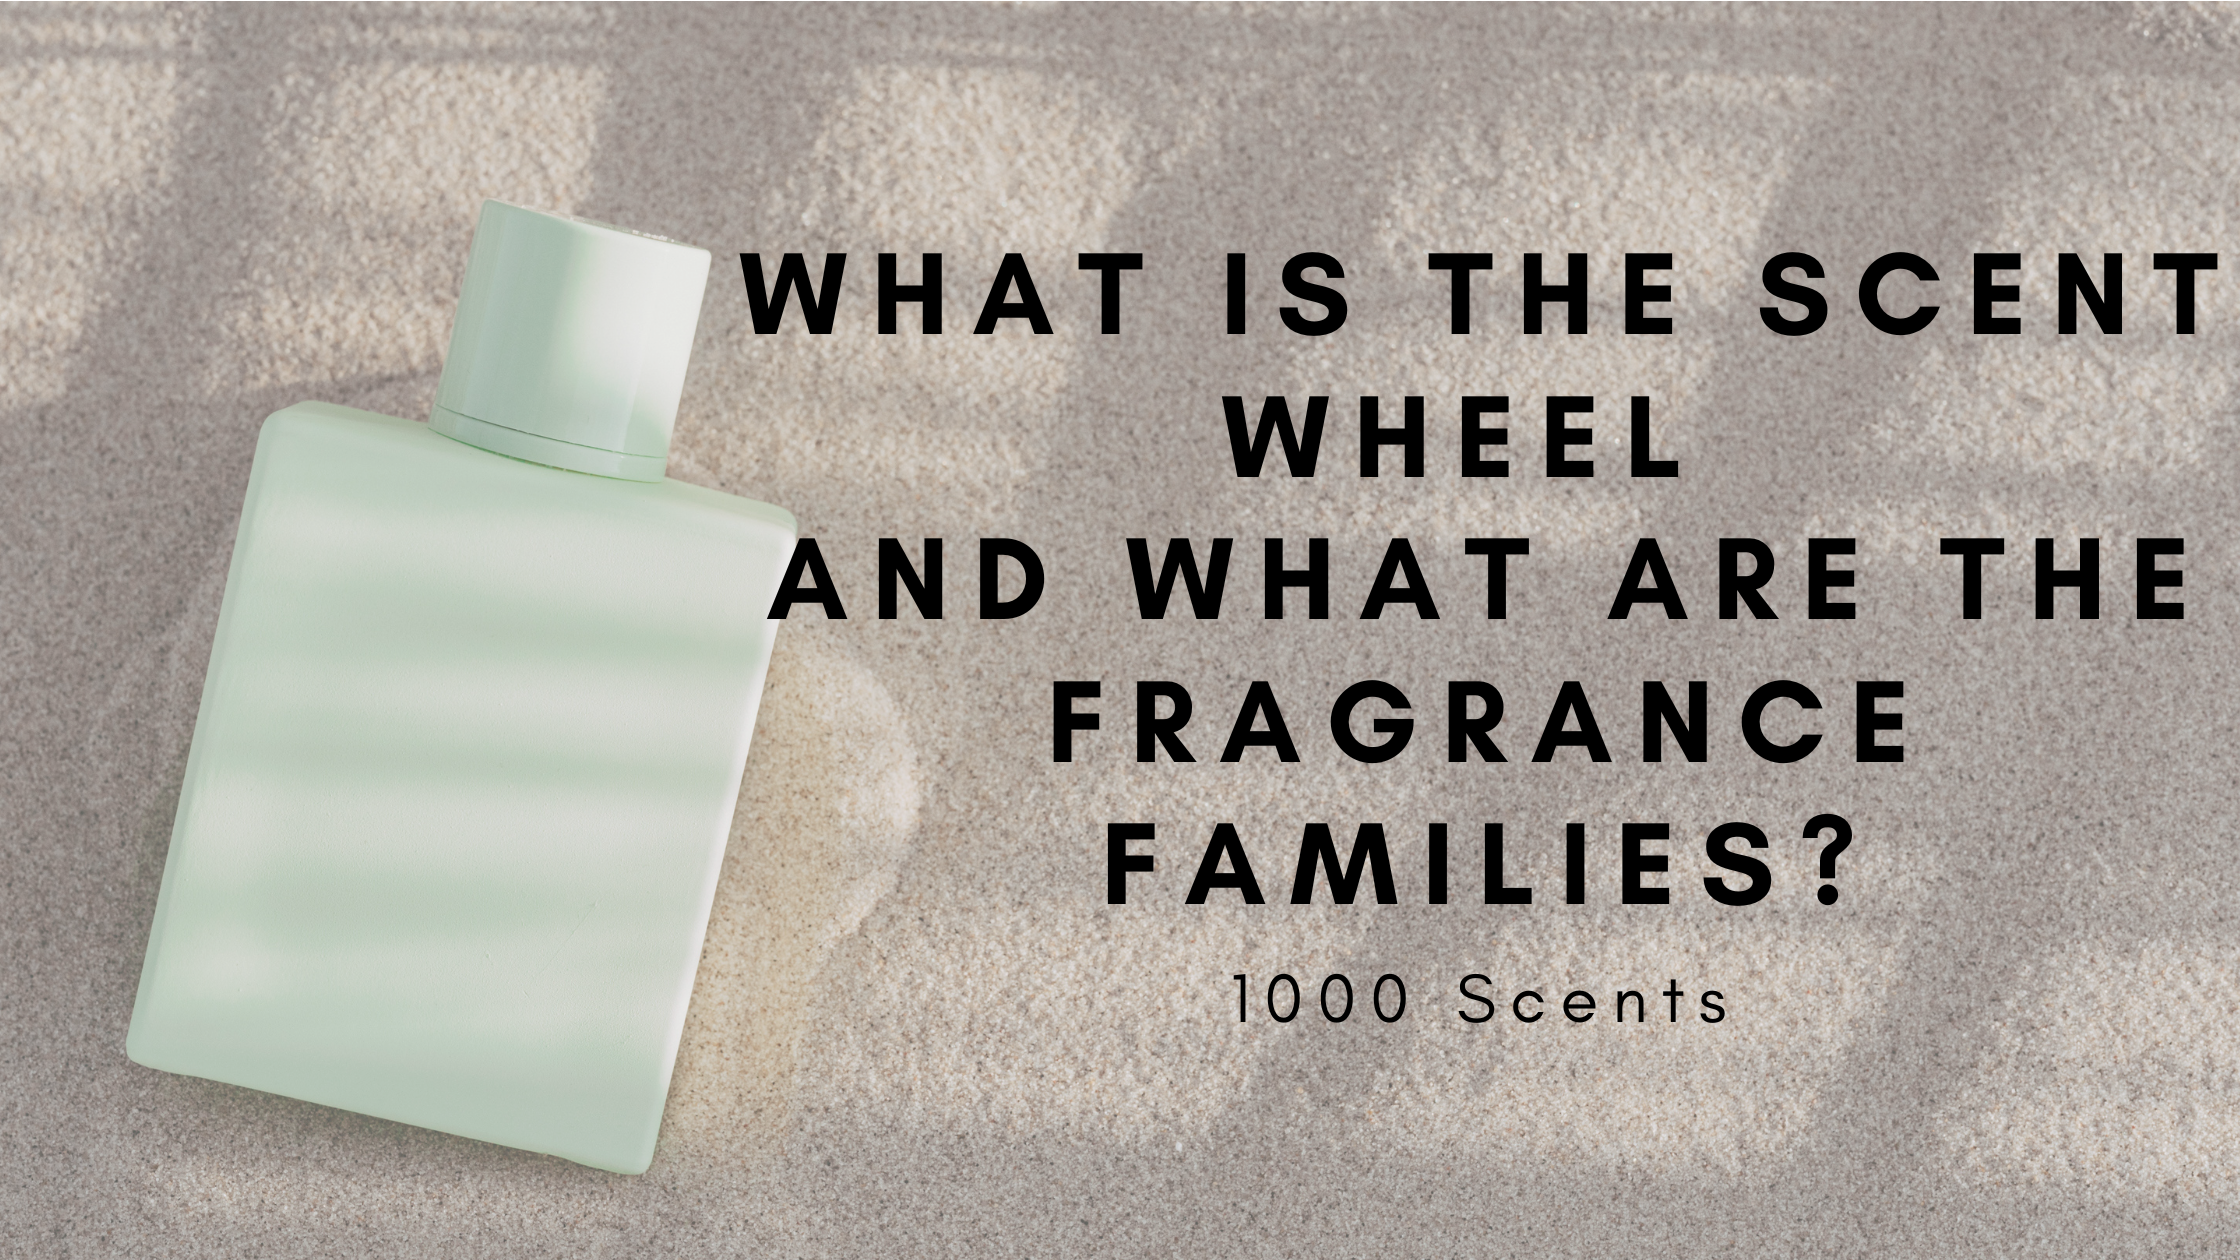 What Is The Scent Wheel And What Are Fragrance Families?